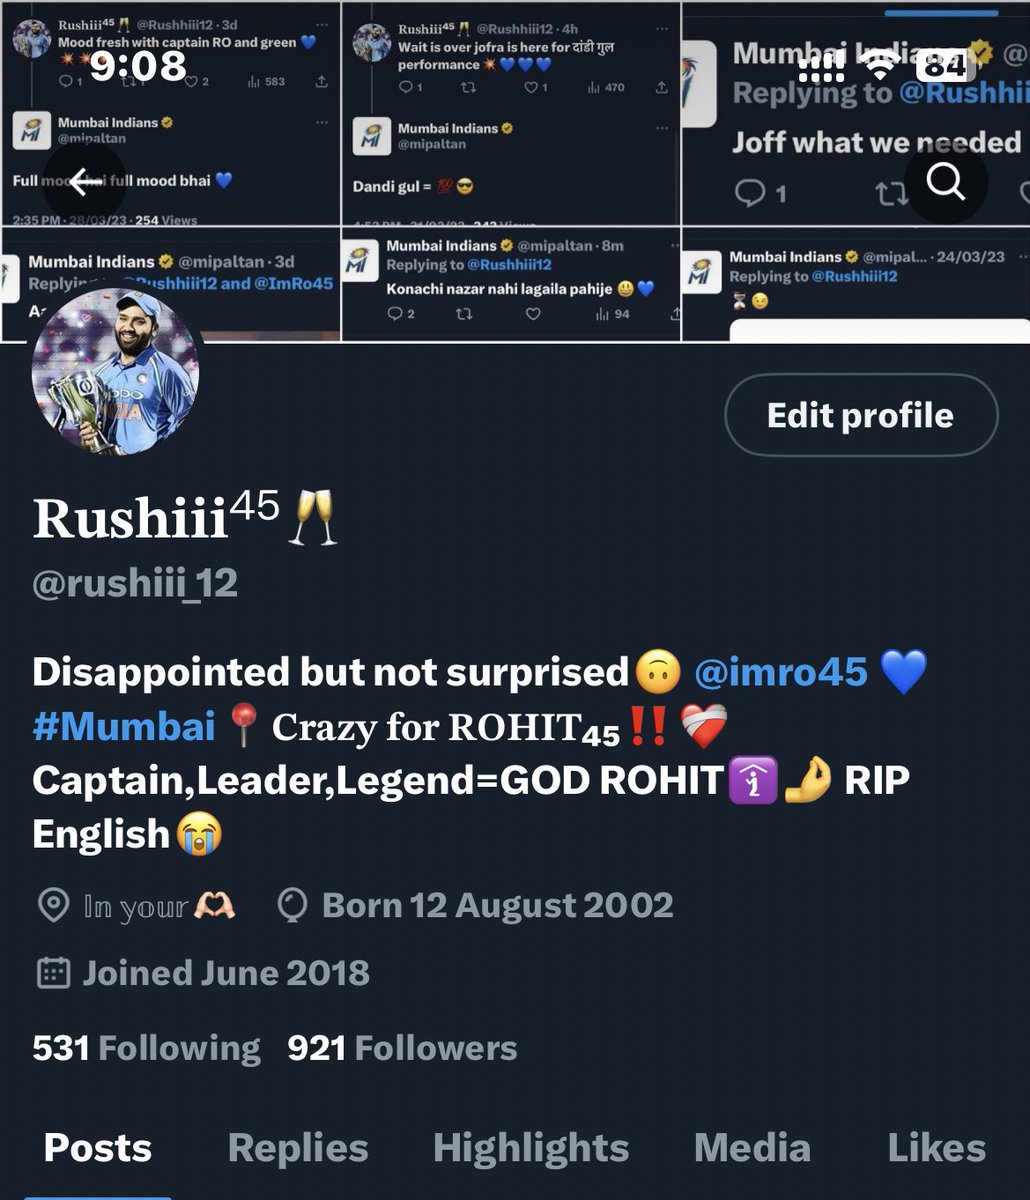 If I get 1K followers in the next 2 days I will buy blue tick. 🤌 80 followers needed for 1k Request to my all Mutual please Rt my tweet & support💙💙 Captain Rohit Sharma ki Jay ho🚩🇮🇳 #RohitSharma𓃵 #follo4follo